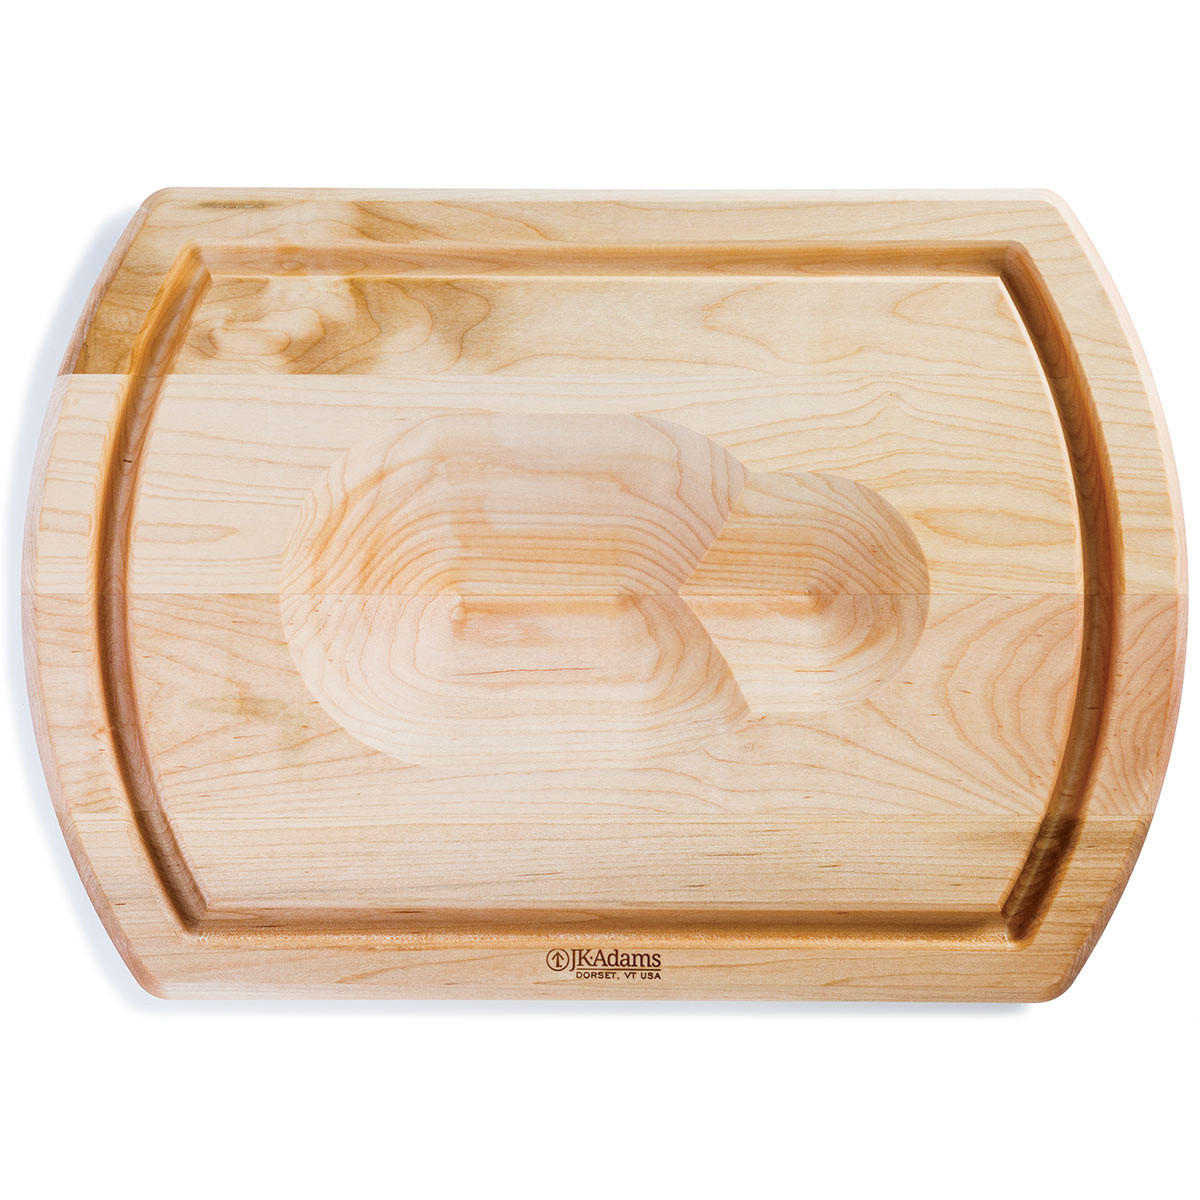  Valdez-Shaughnessy Maple Reversible Carving Board | Stag Crest 'S' 